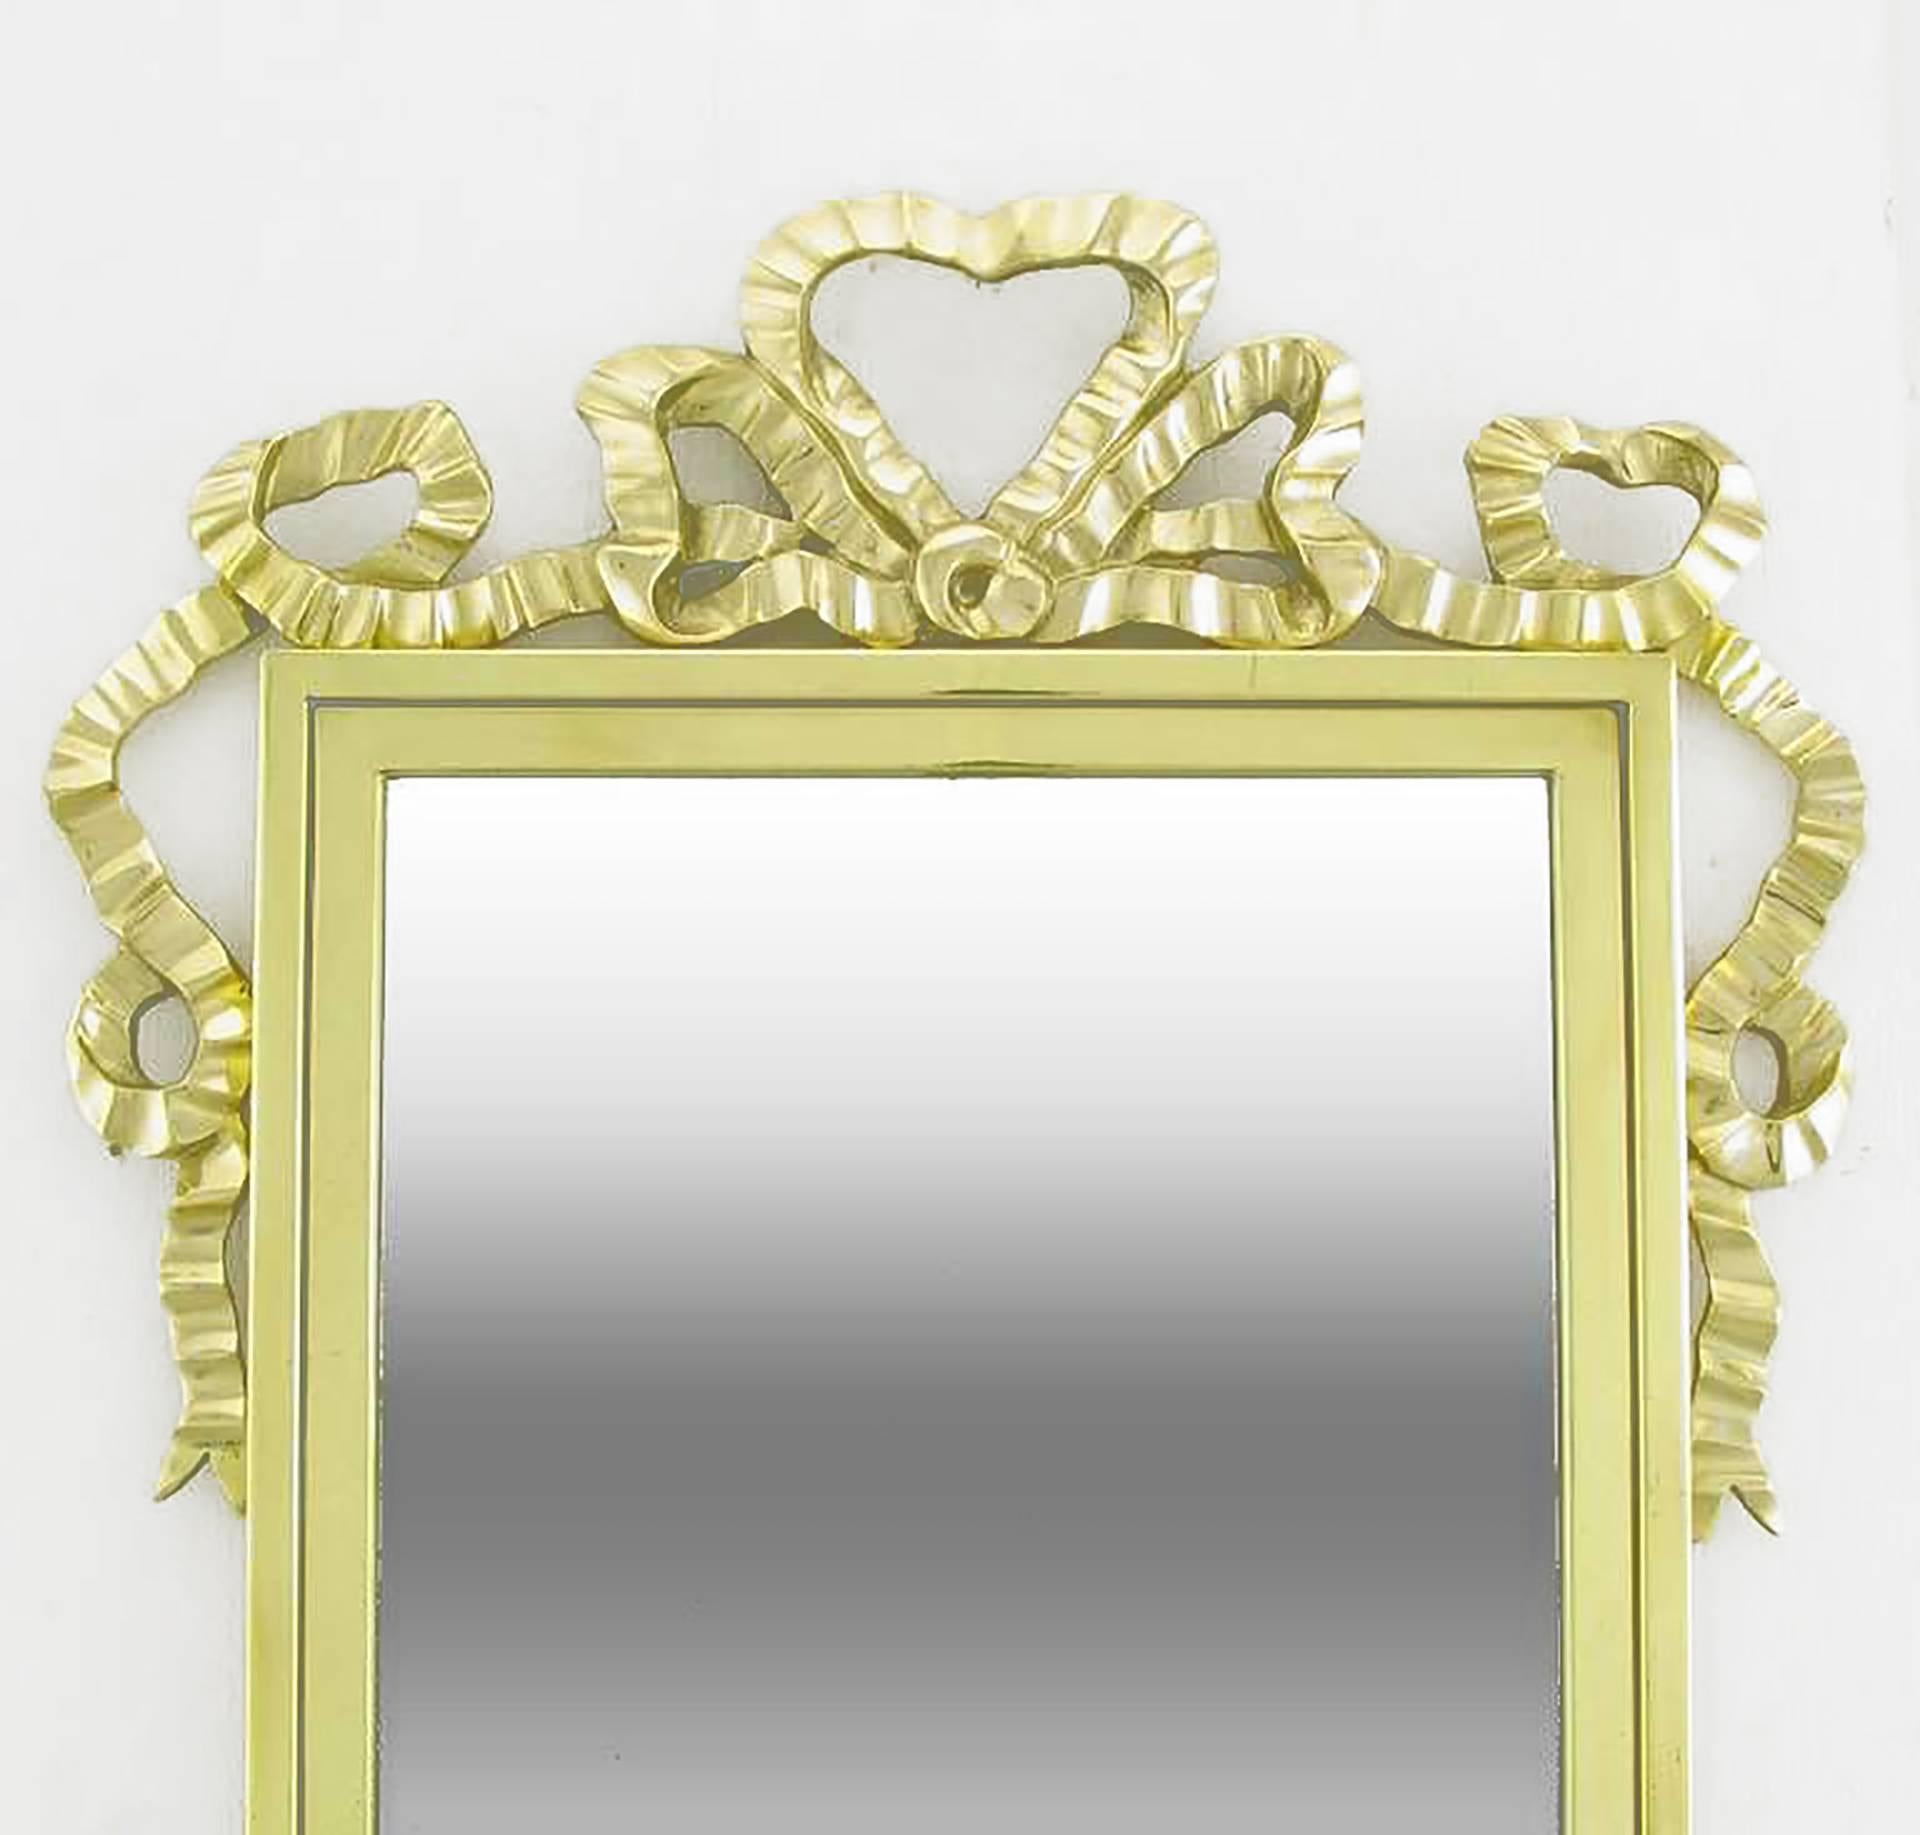 Elegant solid brass mirror, framed with ribbon fold swags. Italian import, marketed through Decorative Crafts Inc., an exclusively 